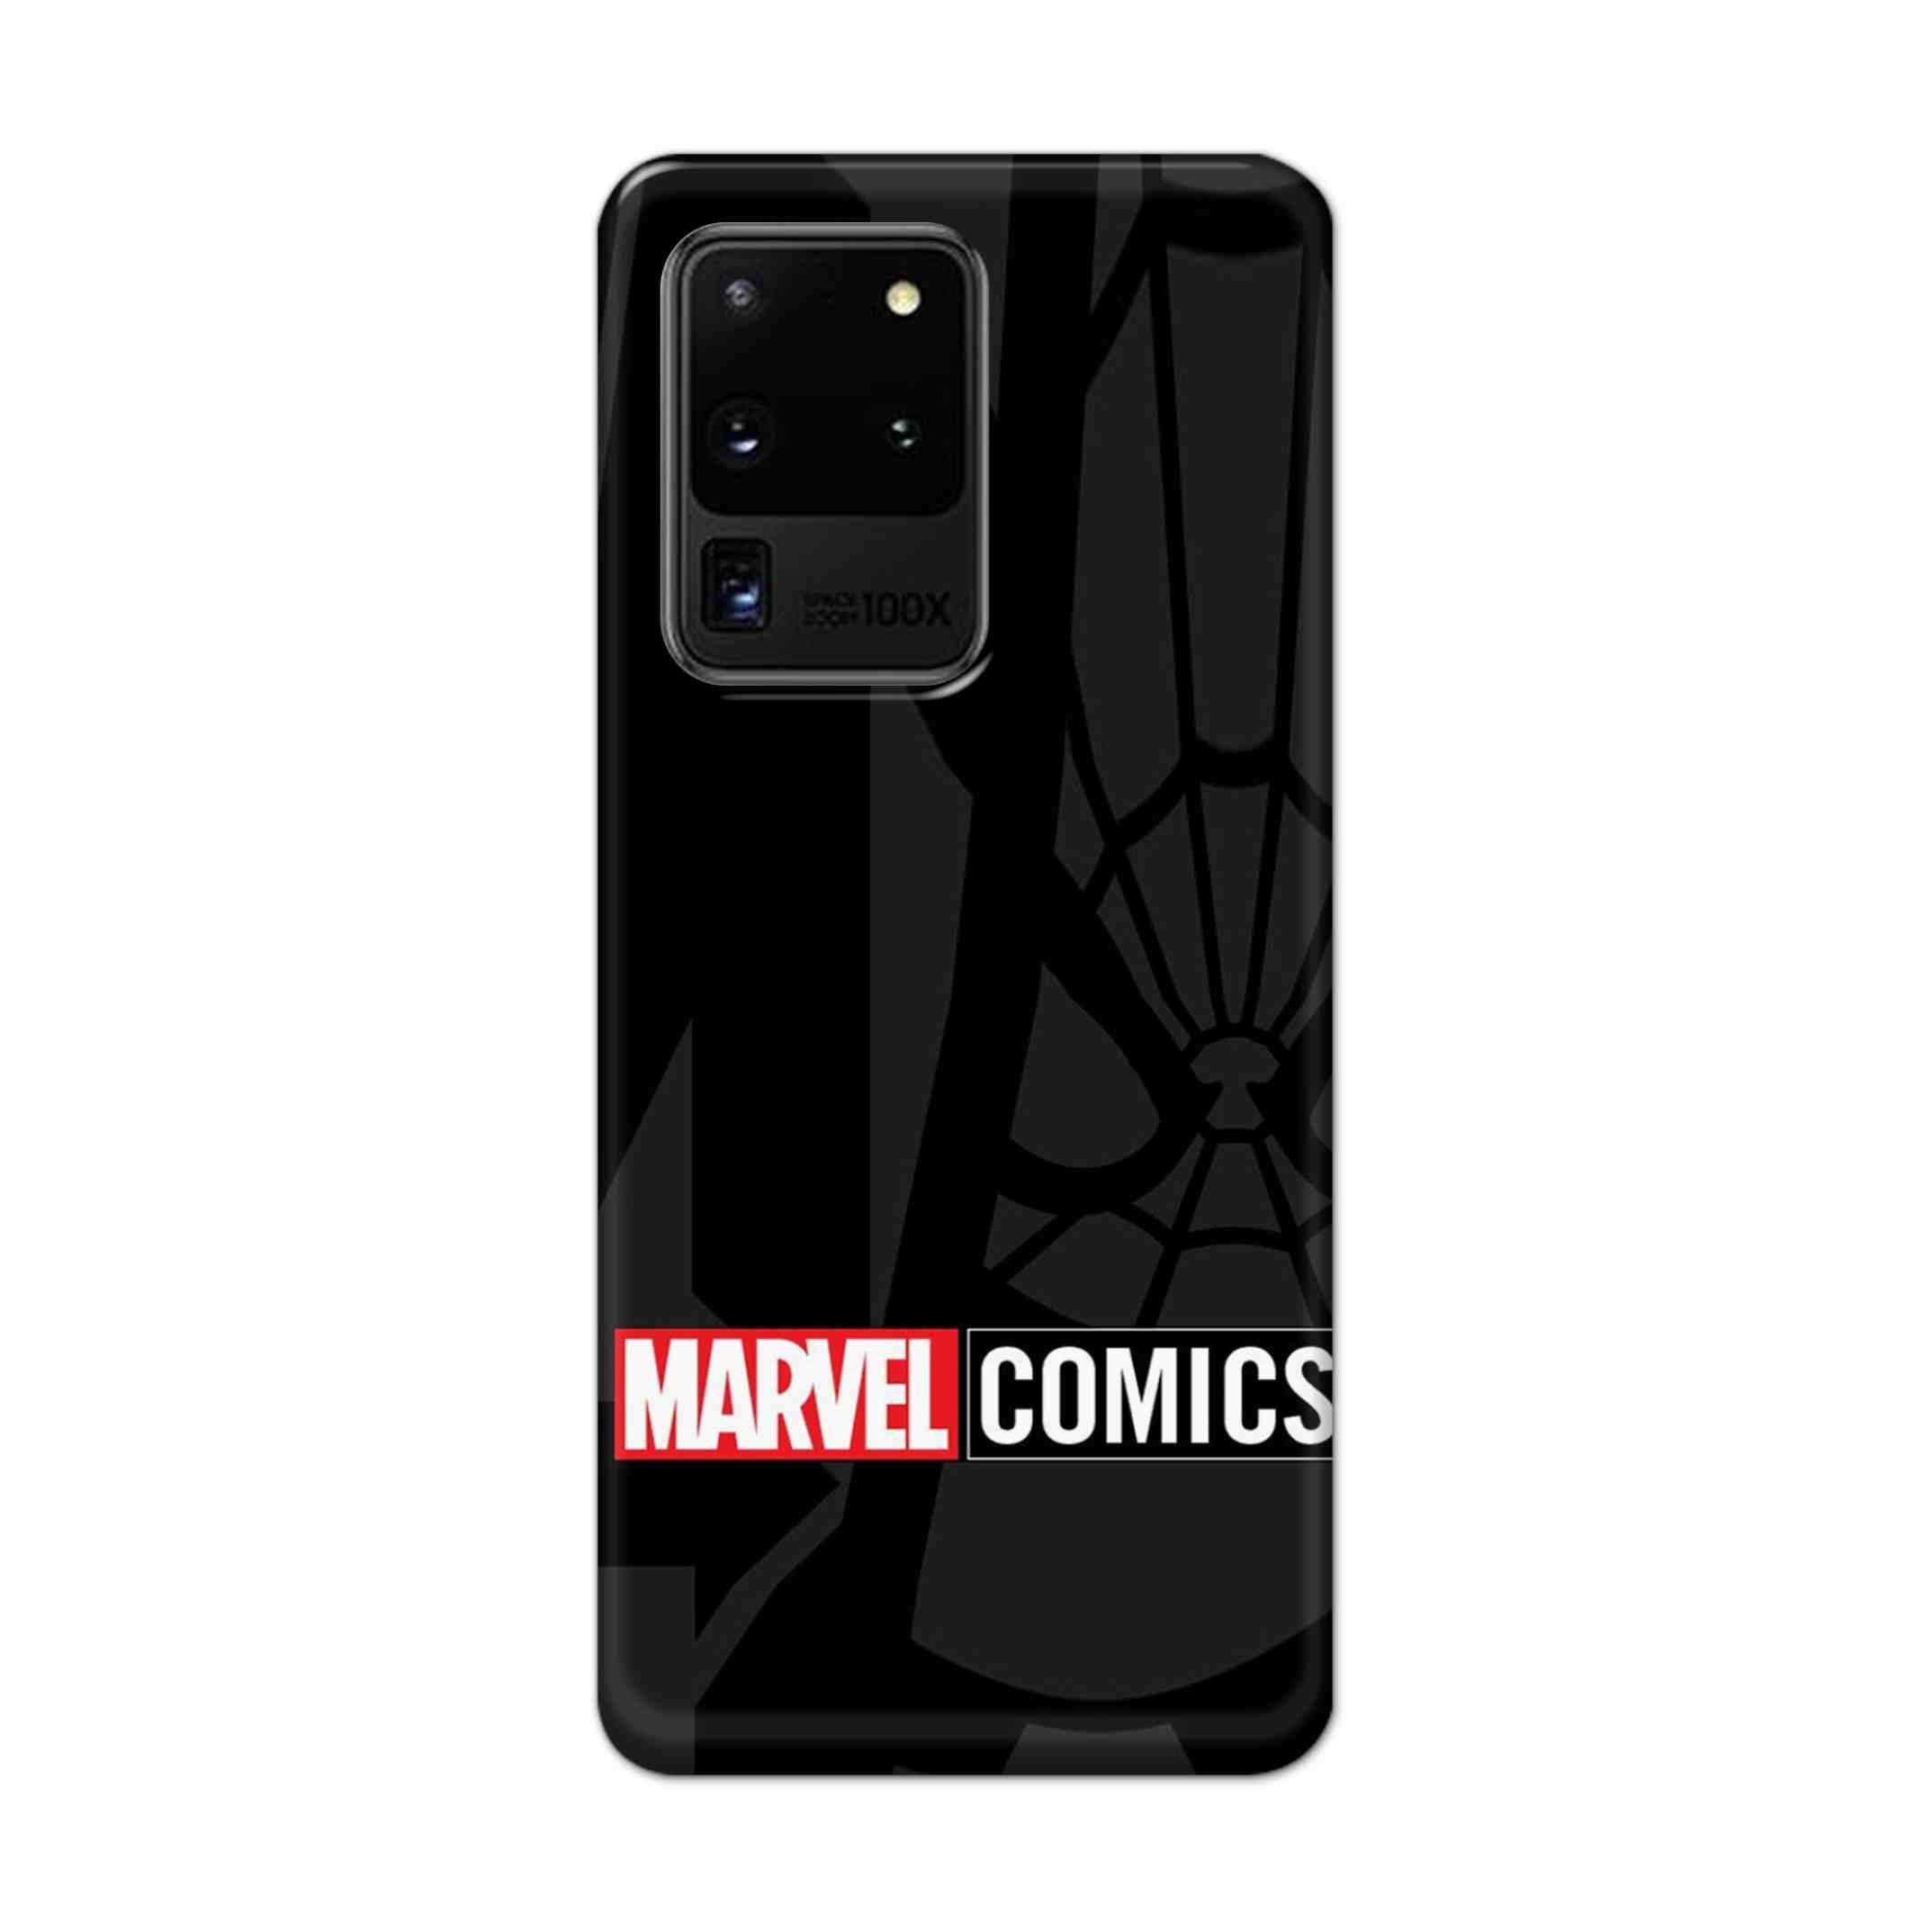 Buy Marvel Comics Hard Back Mobile Phone Case Cover For Samsung Galaxy S20 Ultra Online